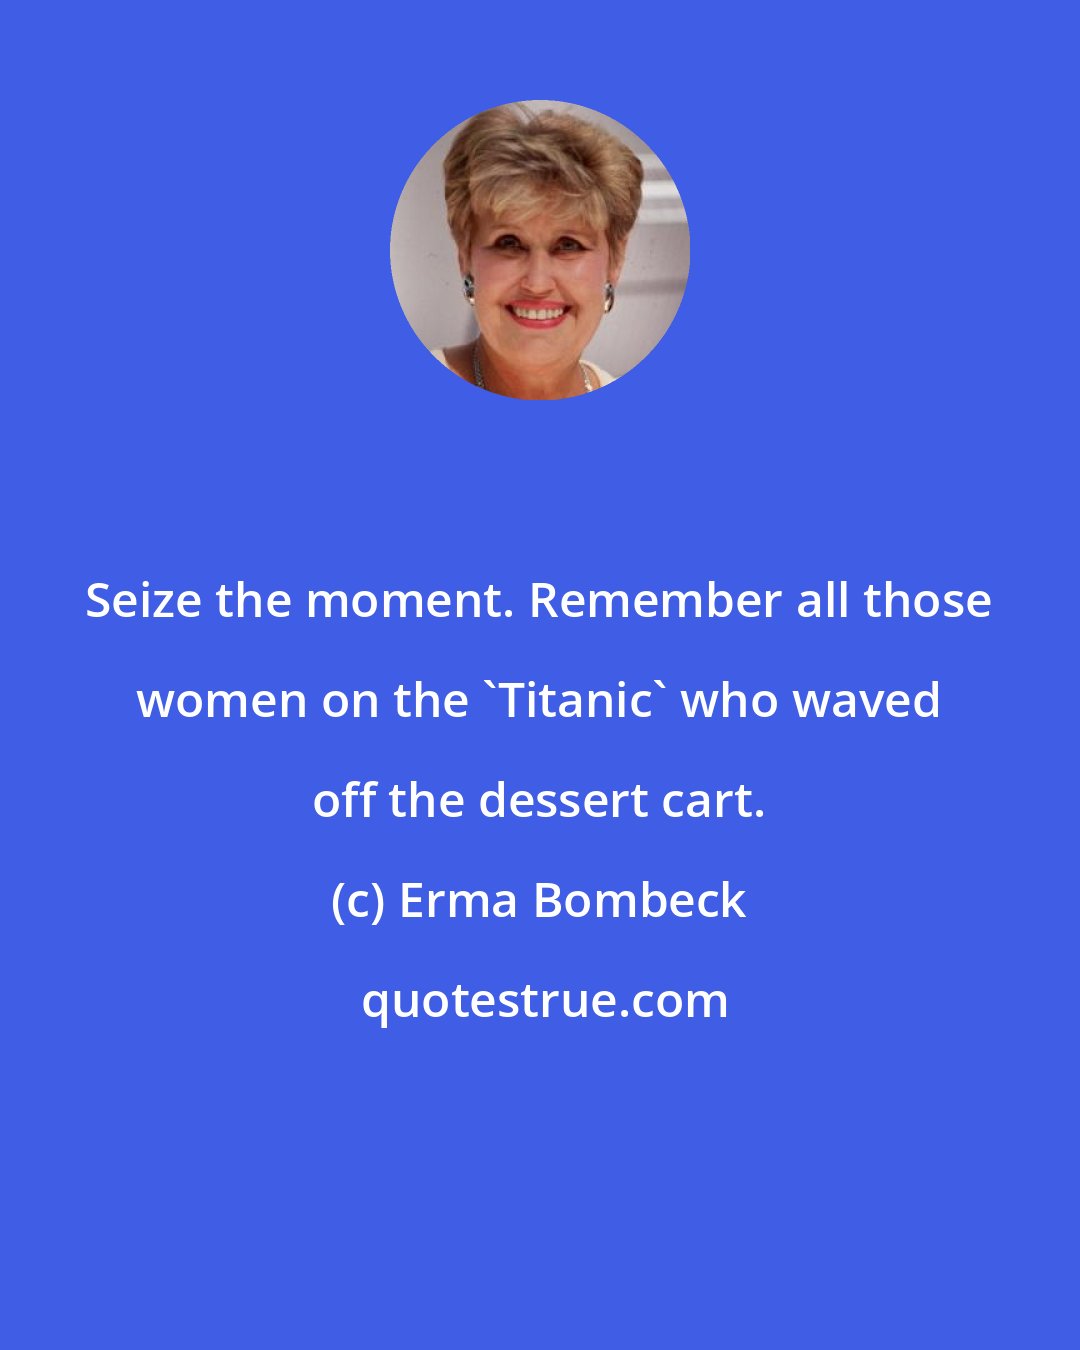 Erma Bombeck: Seize the moment. Remember all those women on the 'Titanic' who waved off the dessert cart.